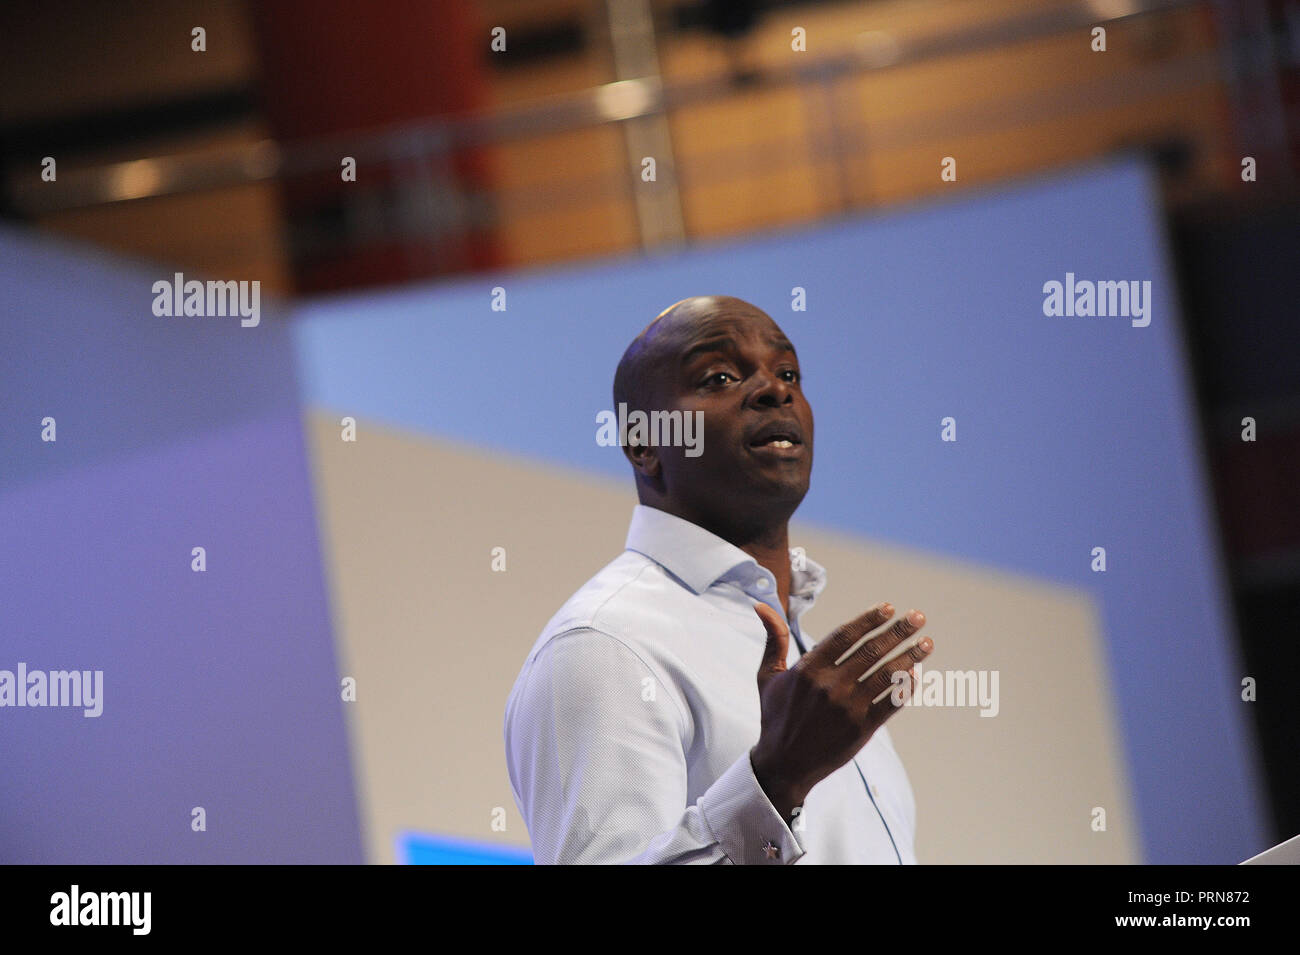 Birmingham, England. 3rd October, 2018.  Shaun Bailey who has been selected as the Conservative candidate for Mayor of London, speaking before the  keynote speech of Theresa May MP, Prime Minister and Leader of the Conservative Party, on the closing session of the fourth day of the Conservative Party annual conference at the ICC.  Kevin Hayes/Alamy Live News Stock Photo